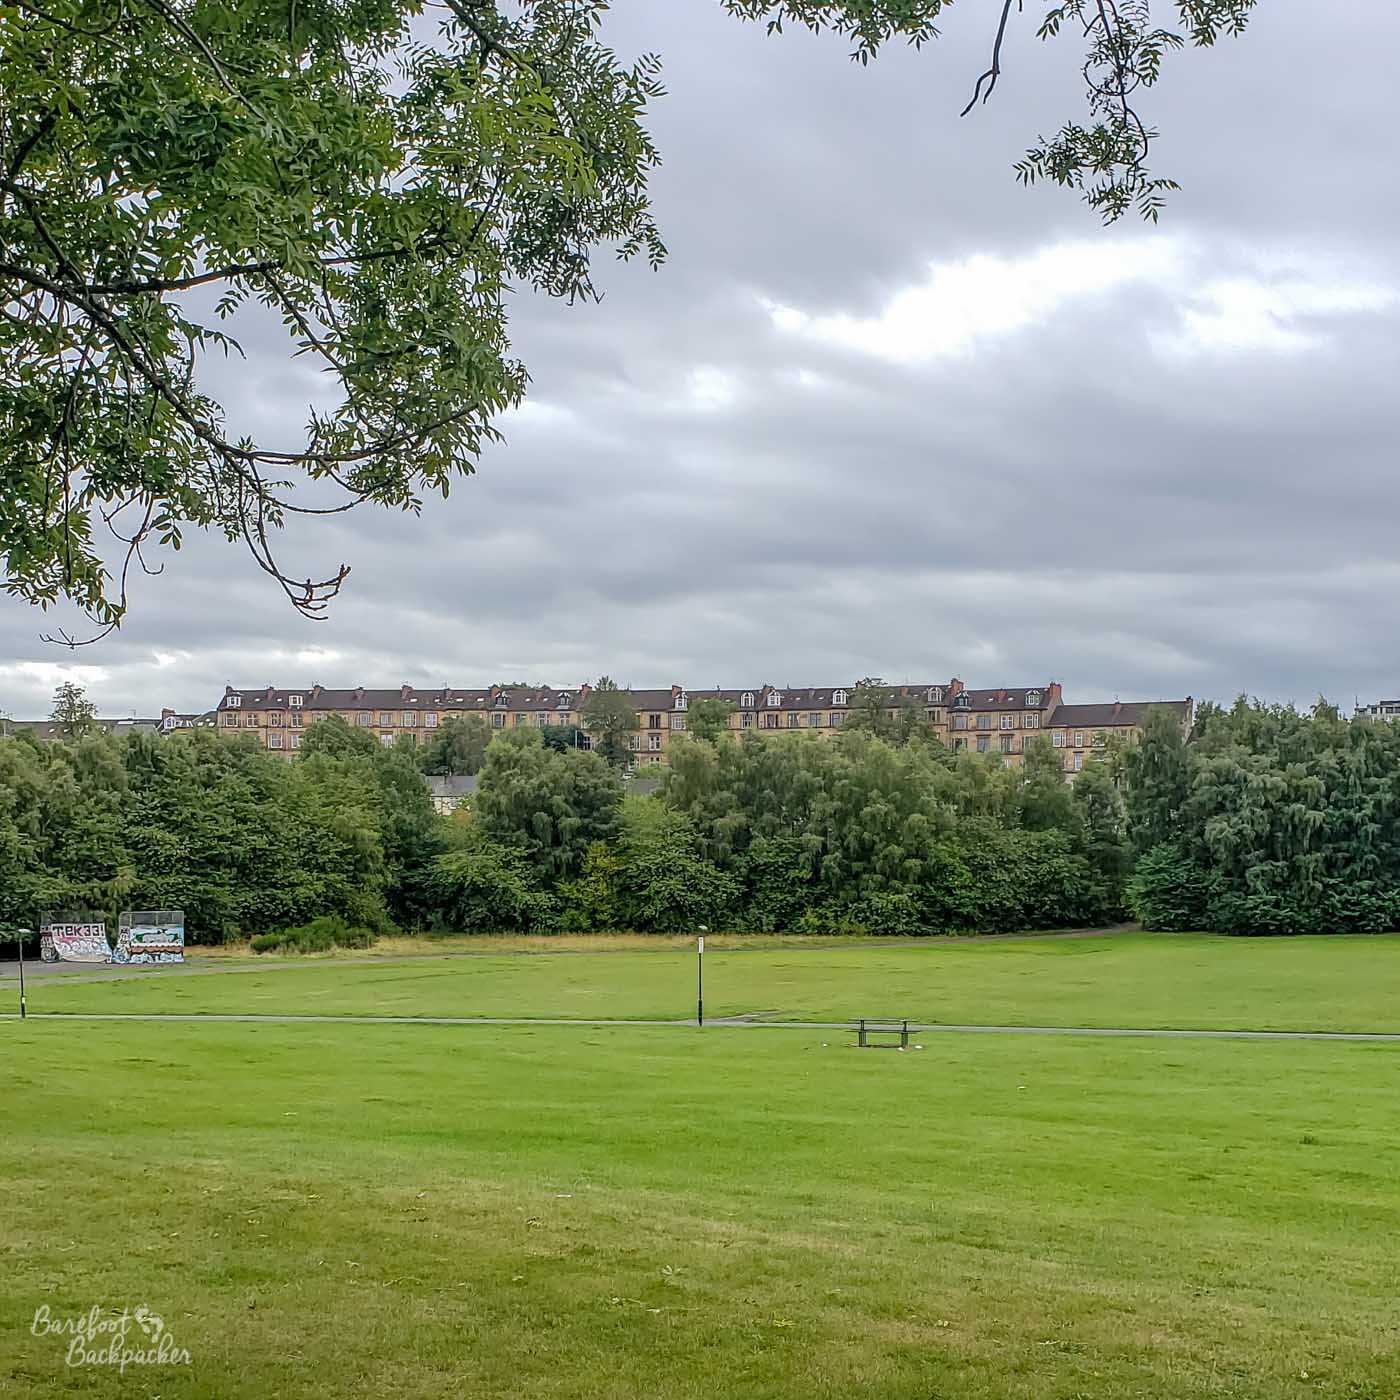 Shot overlooking a large plain grassy park, taken from up a small incline. There's a path just visible crossing from left to right, trees at the far end of the park, and tenements behind.